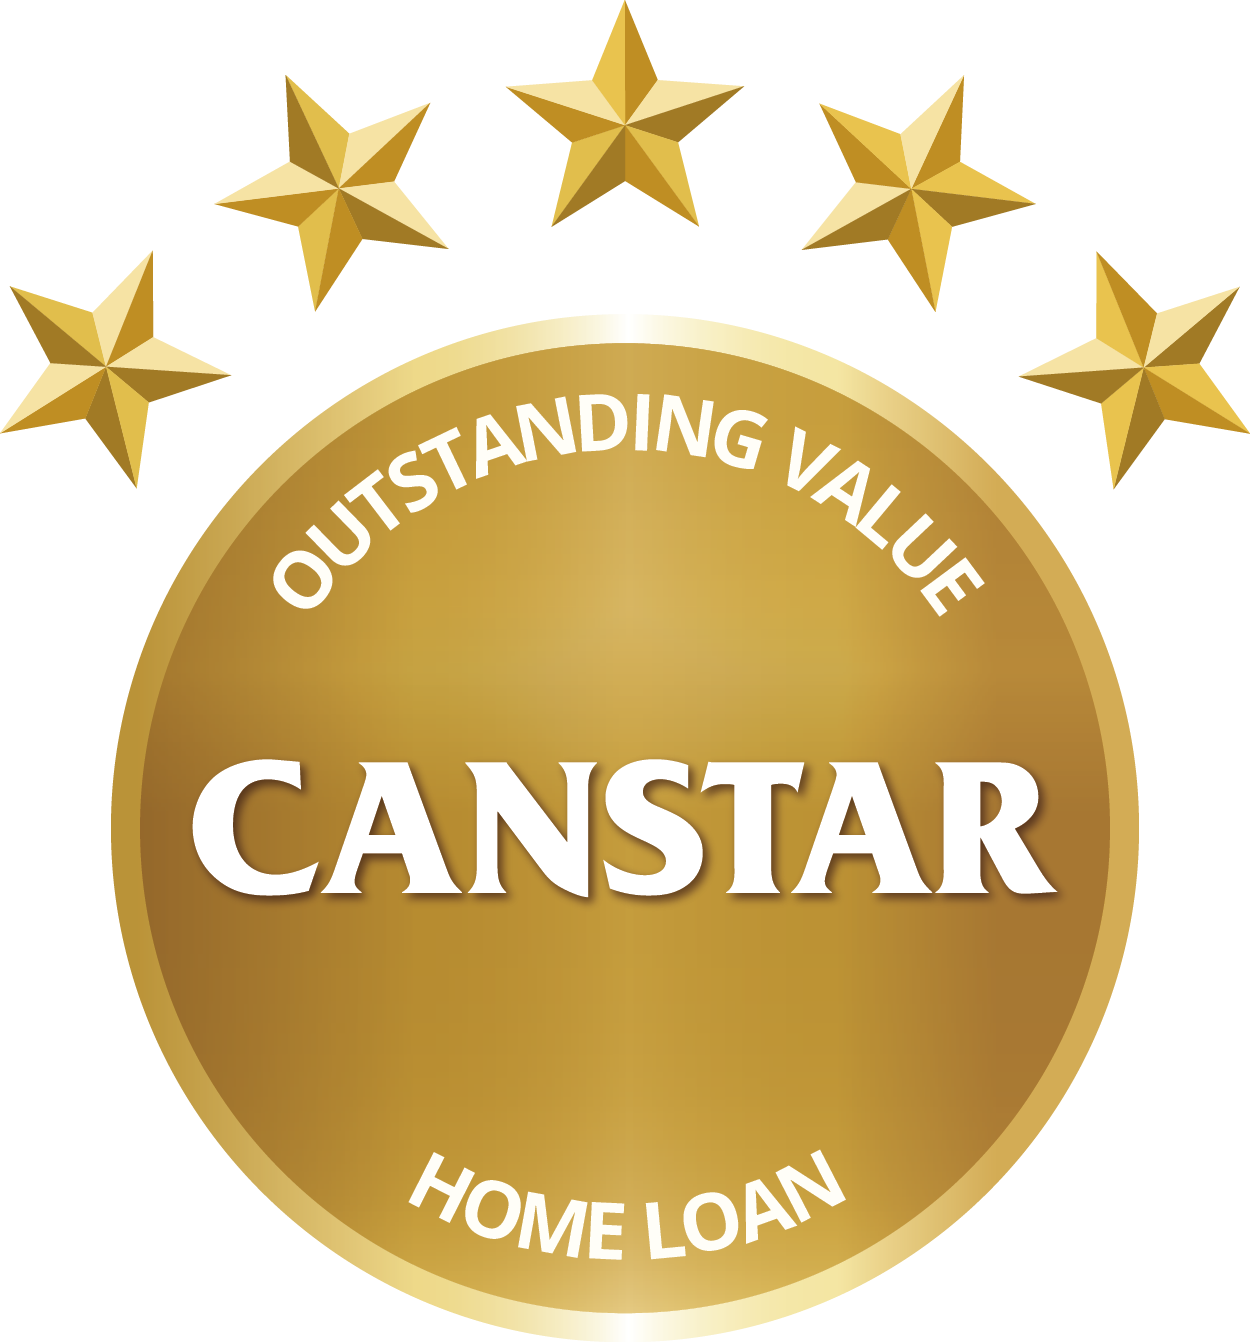 CANSTAR – Outstanding Value – Home Loan